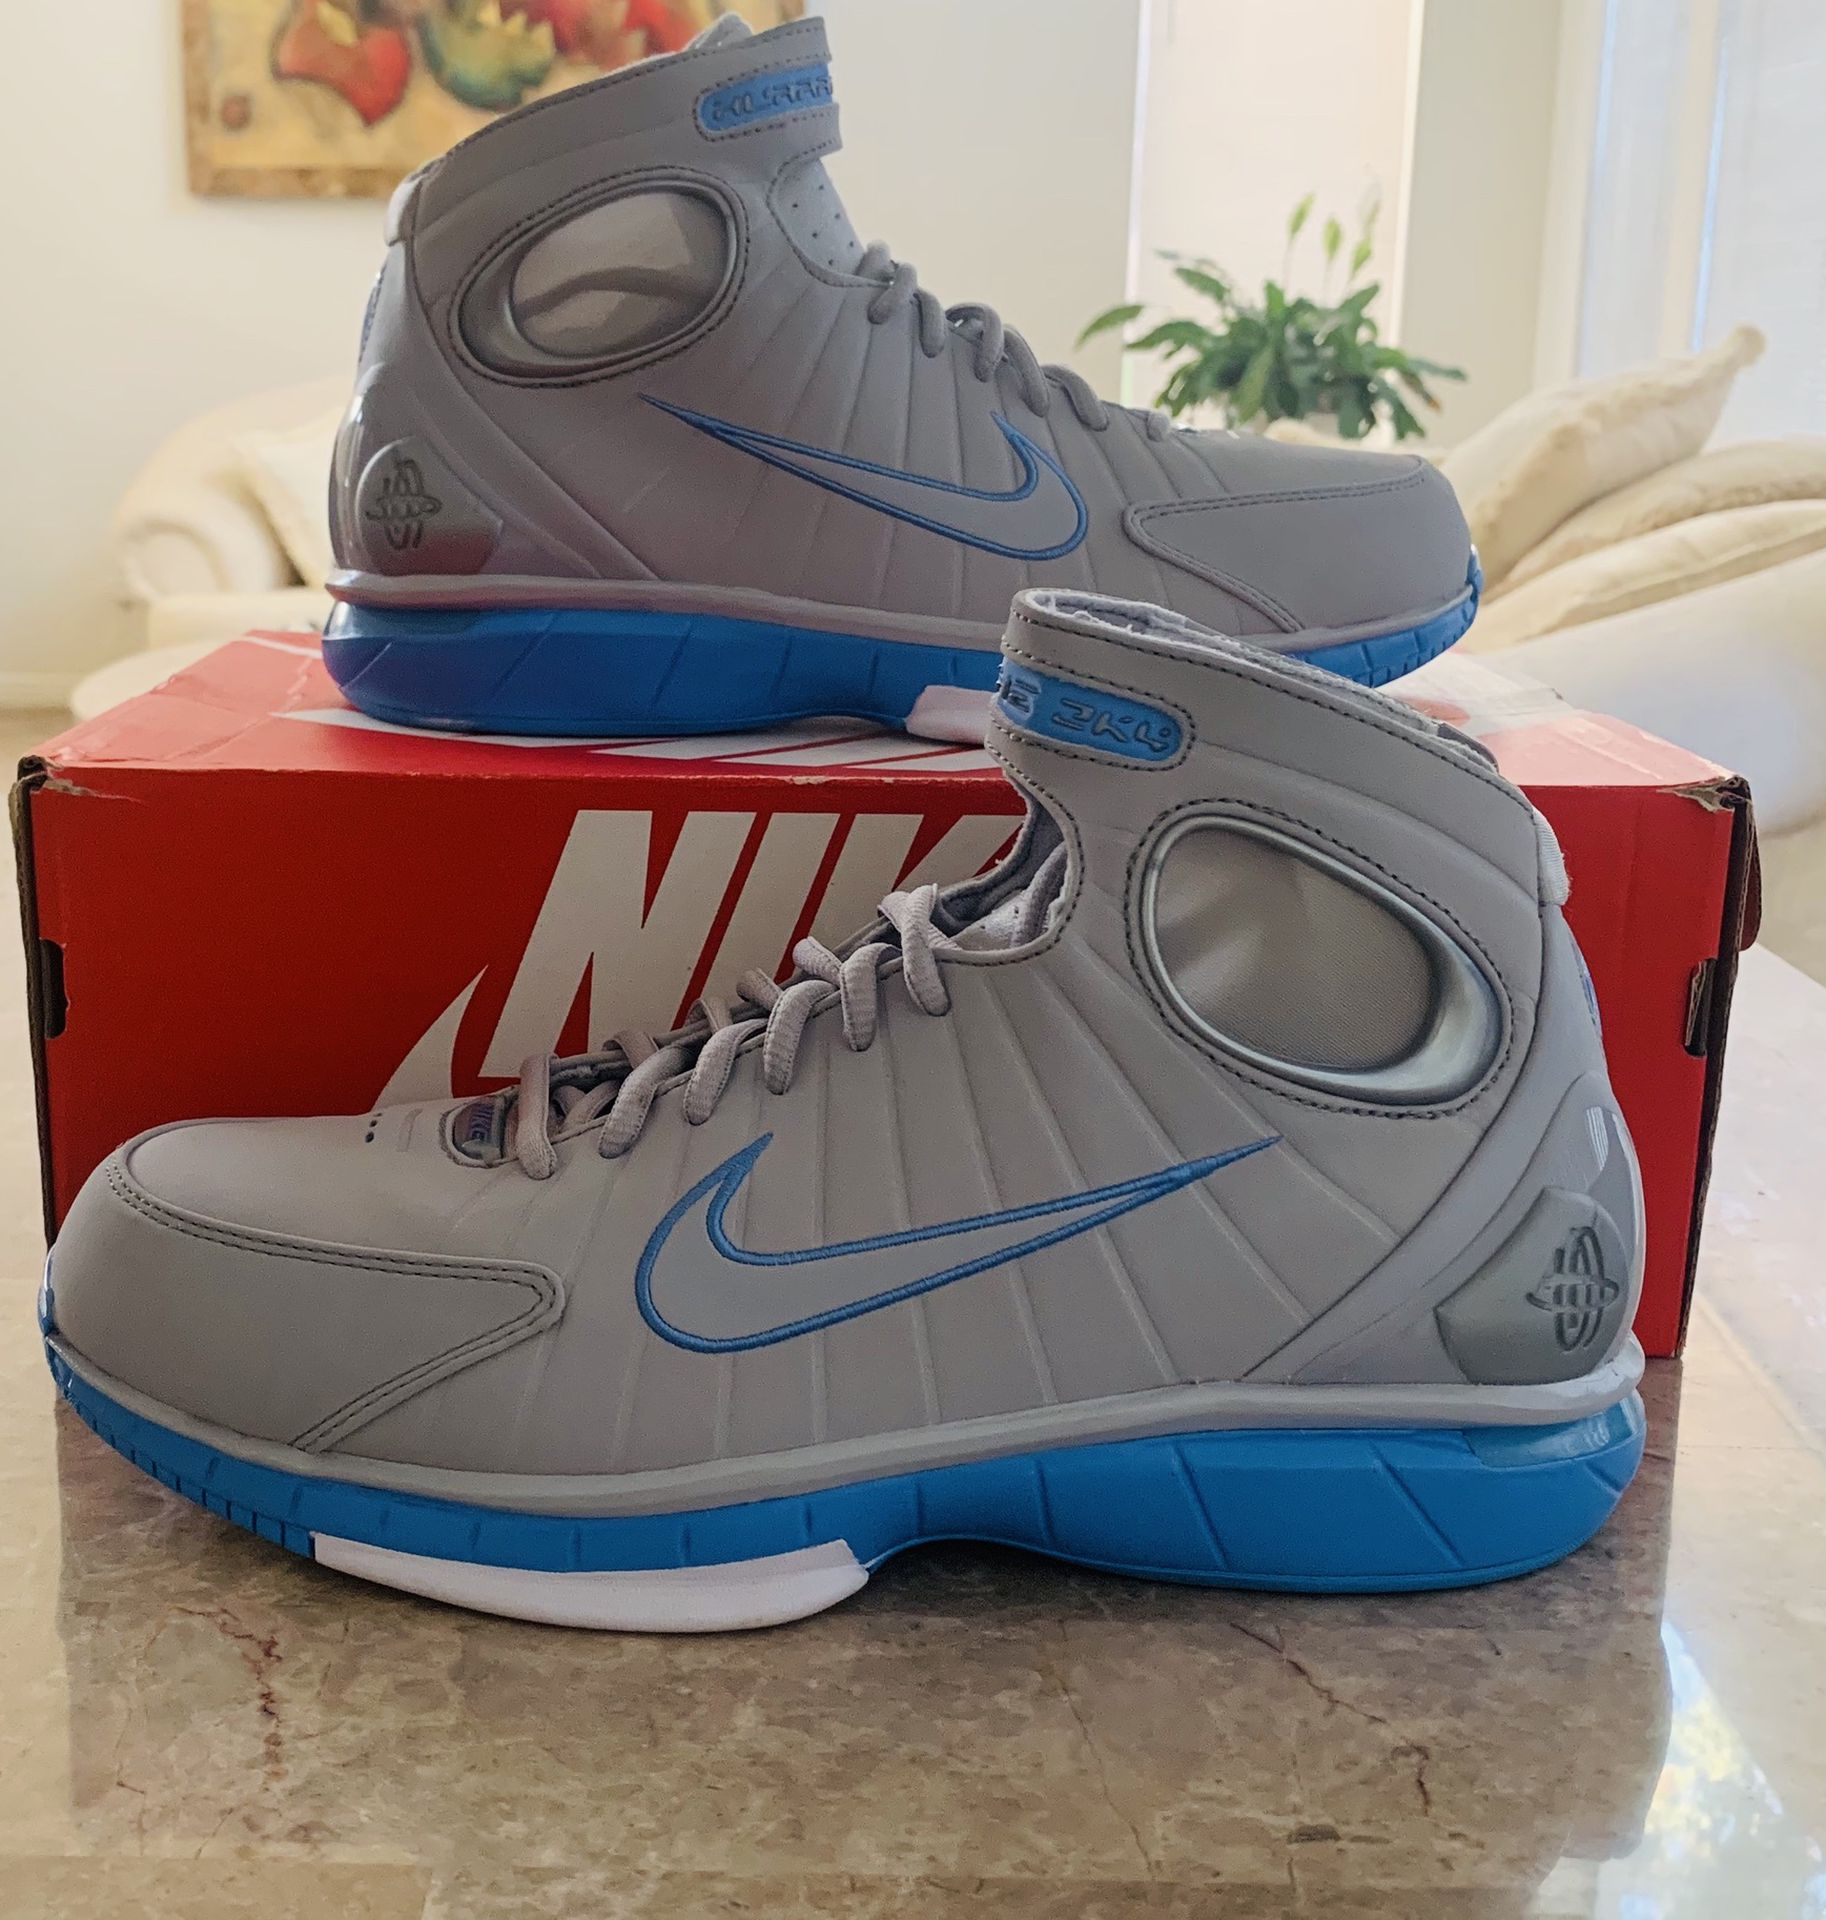 Nike Huarache 2k4 for Sale in Moreno Valley, - OfferUp